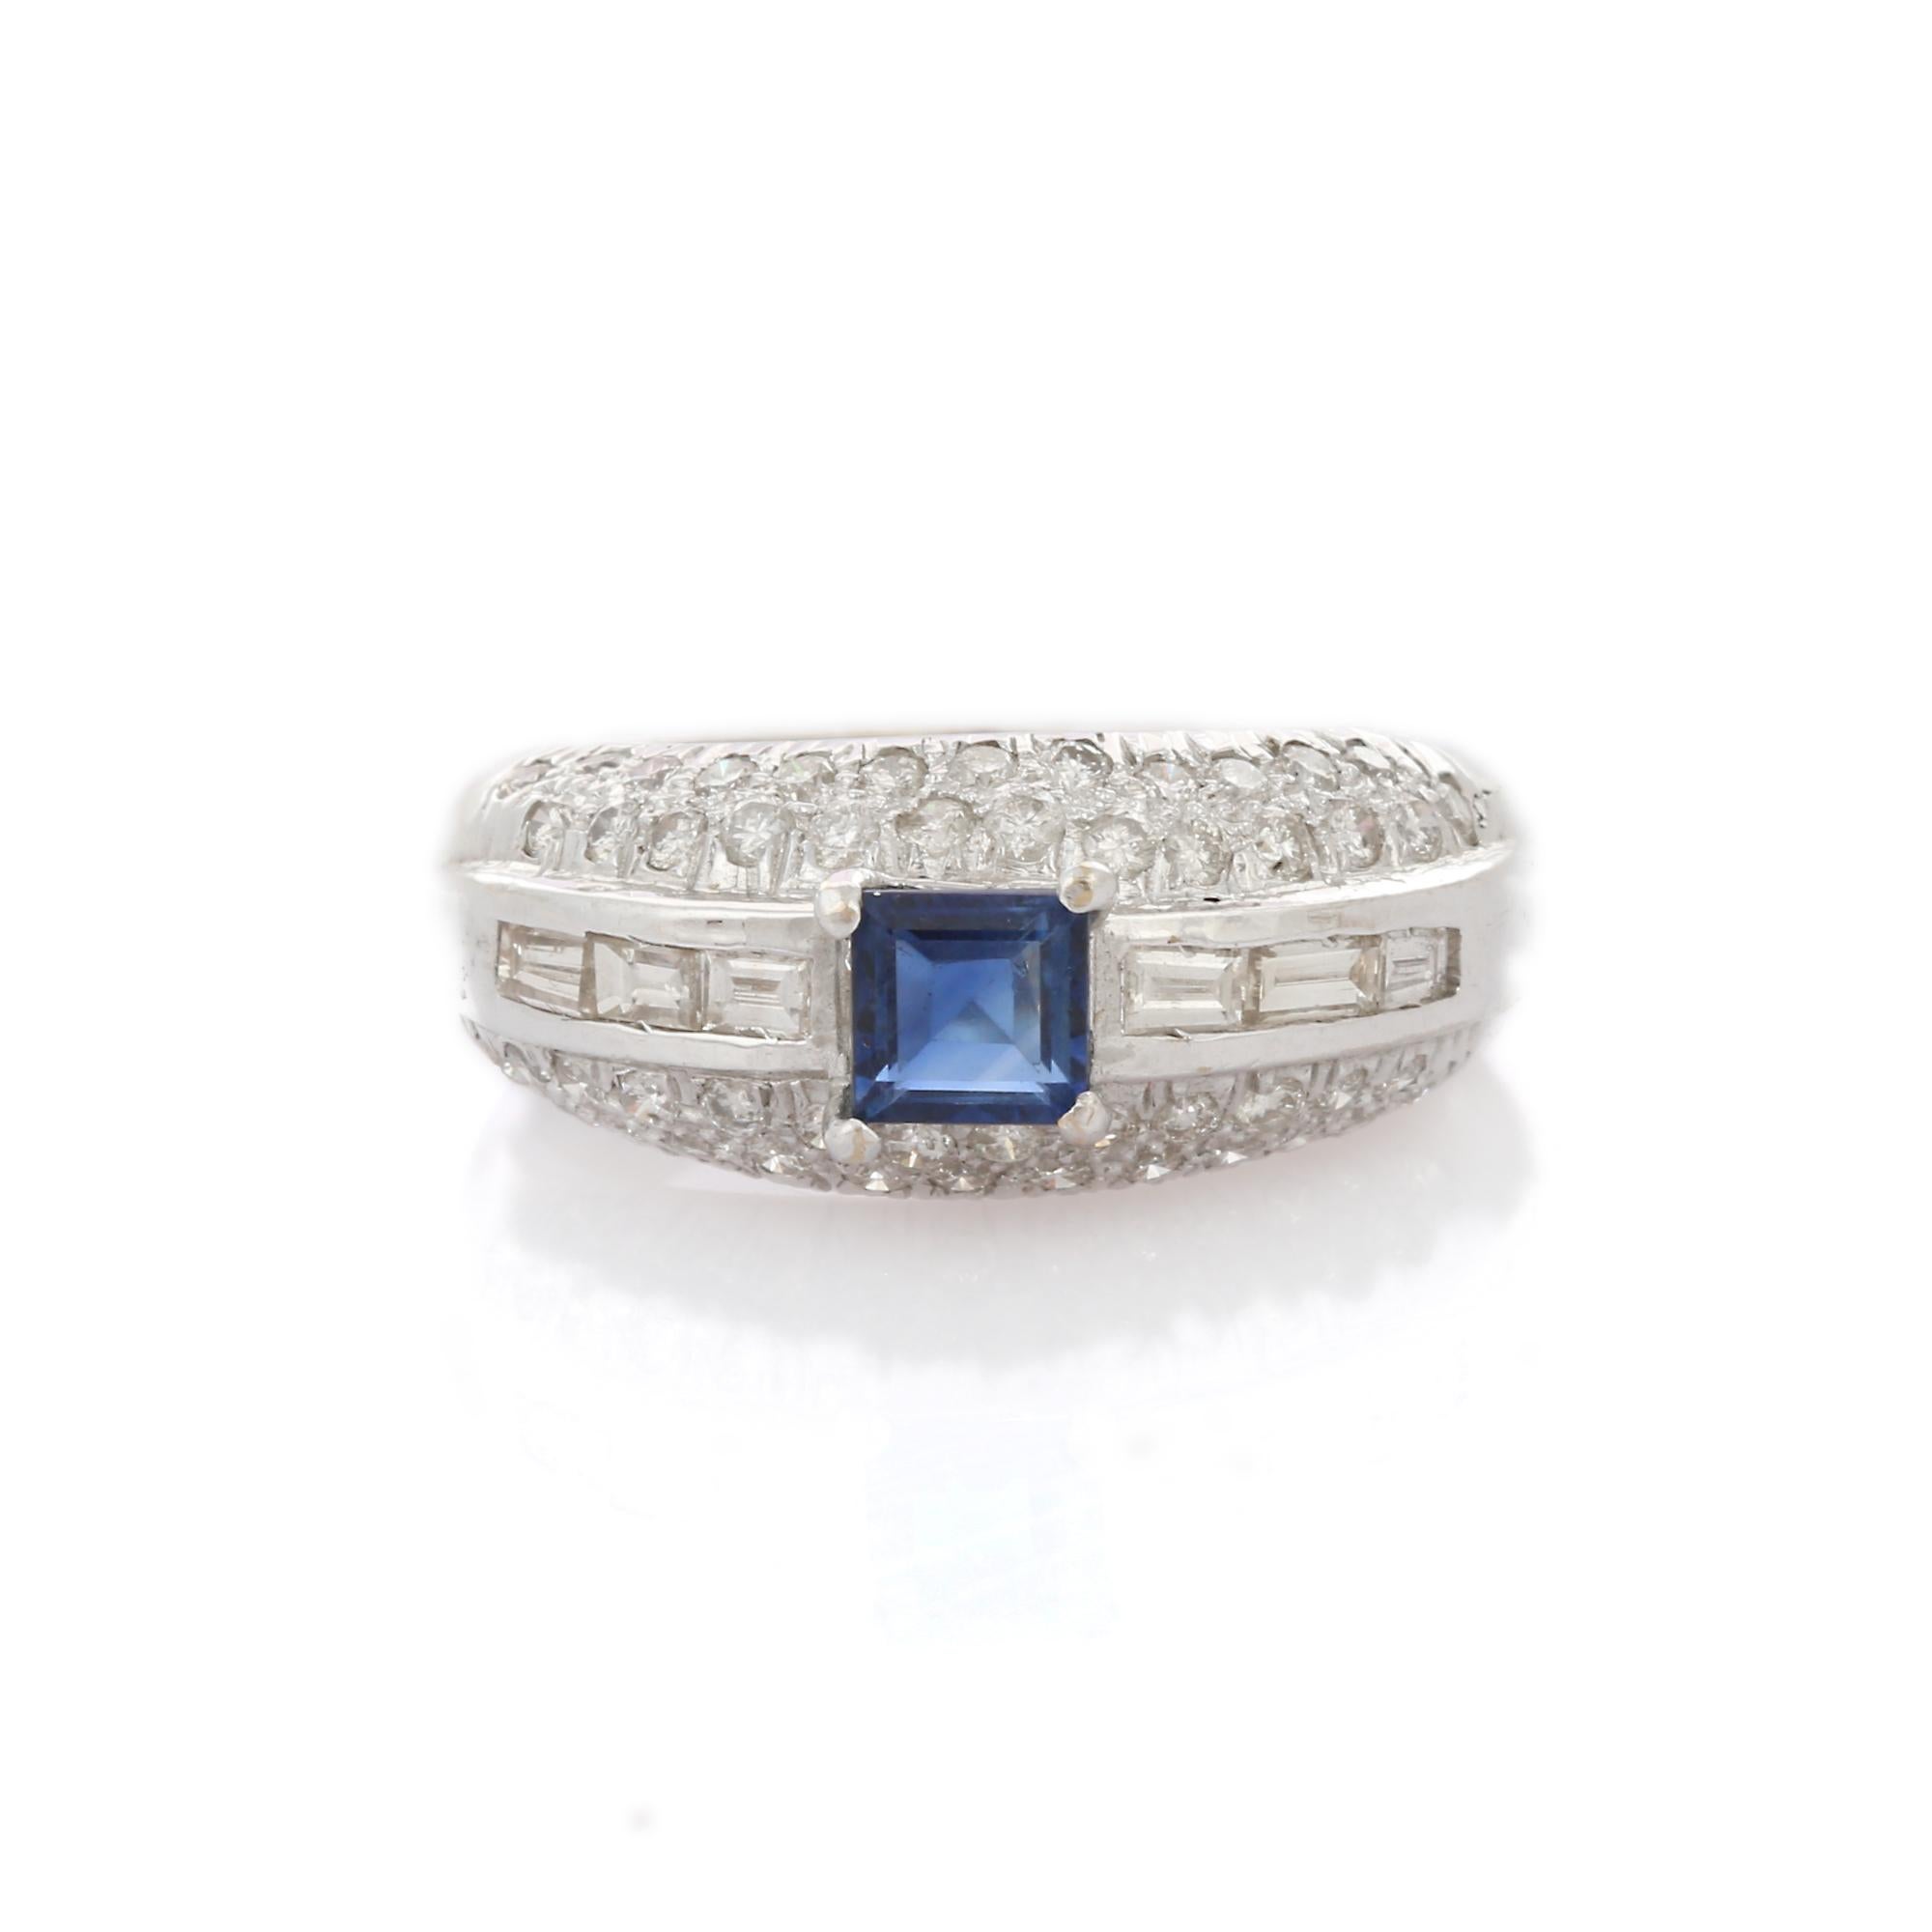 For Sale:  18K White Gold Square Cut Blue Sapphire and Diamonds Cocktail Ring 2